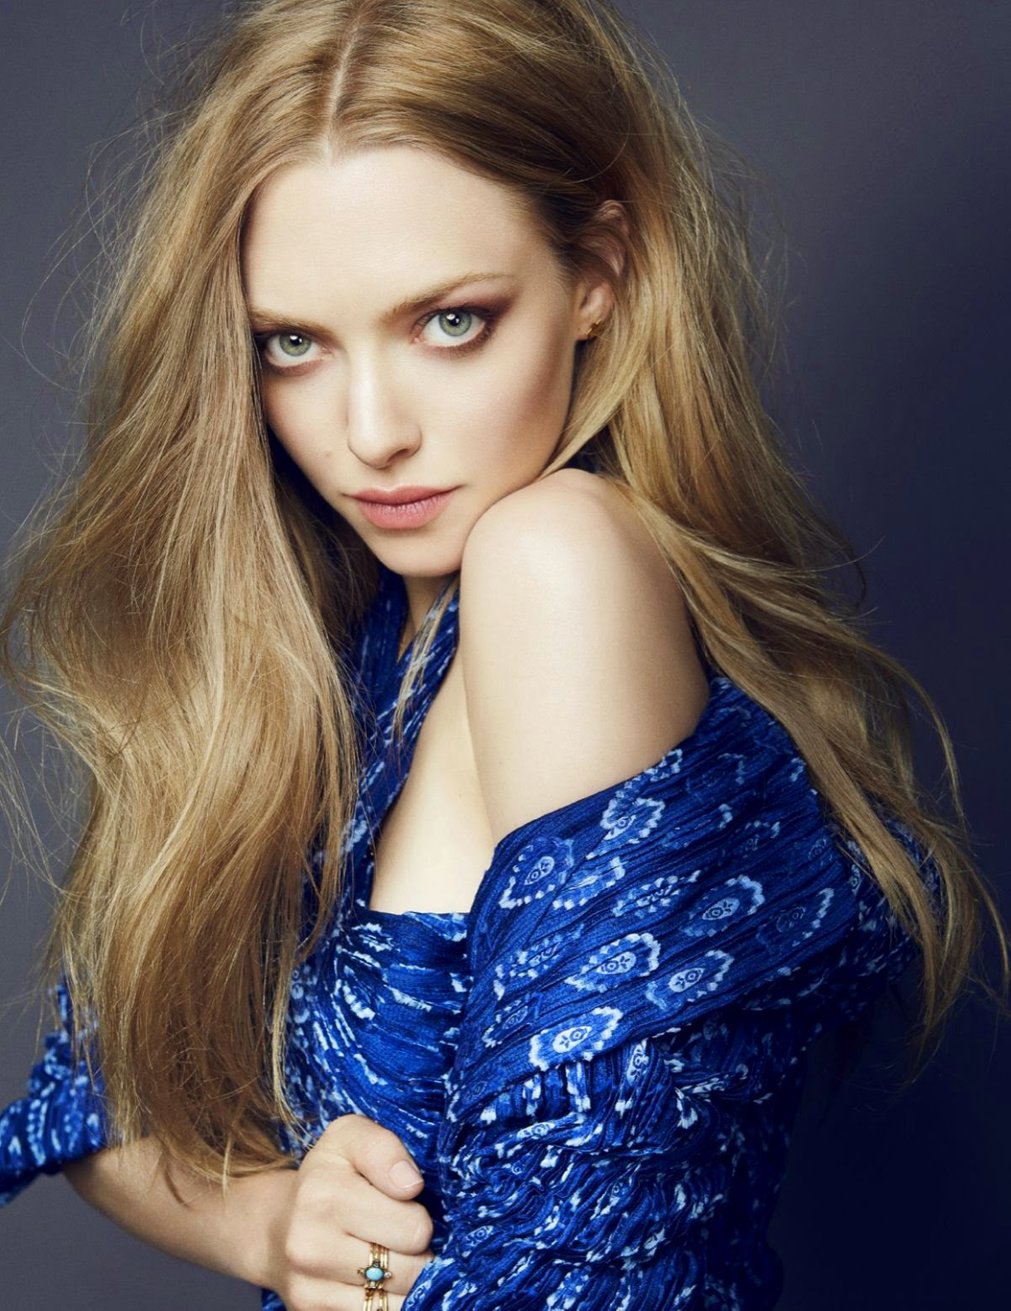 33 Hot Amanda Seyfried Bikini Pictures – One Of the Most Sexiest Girl